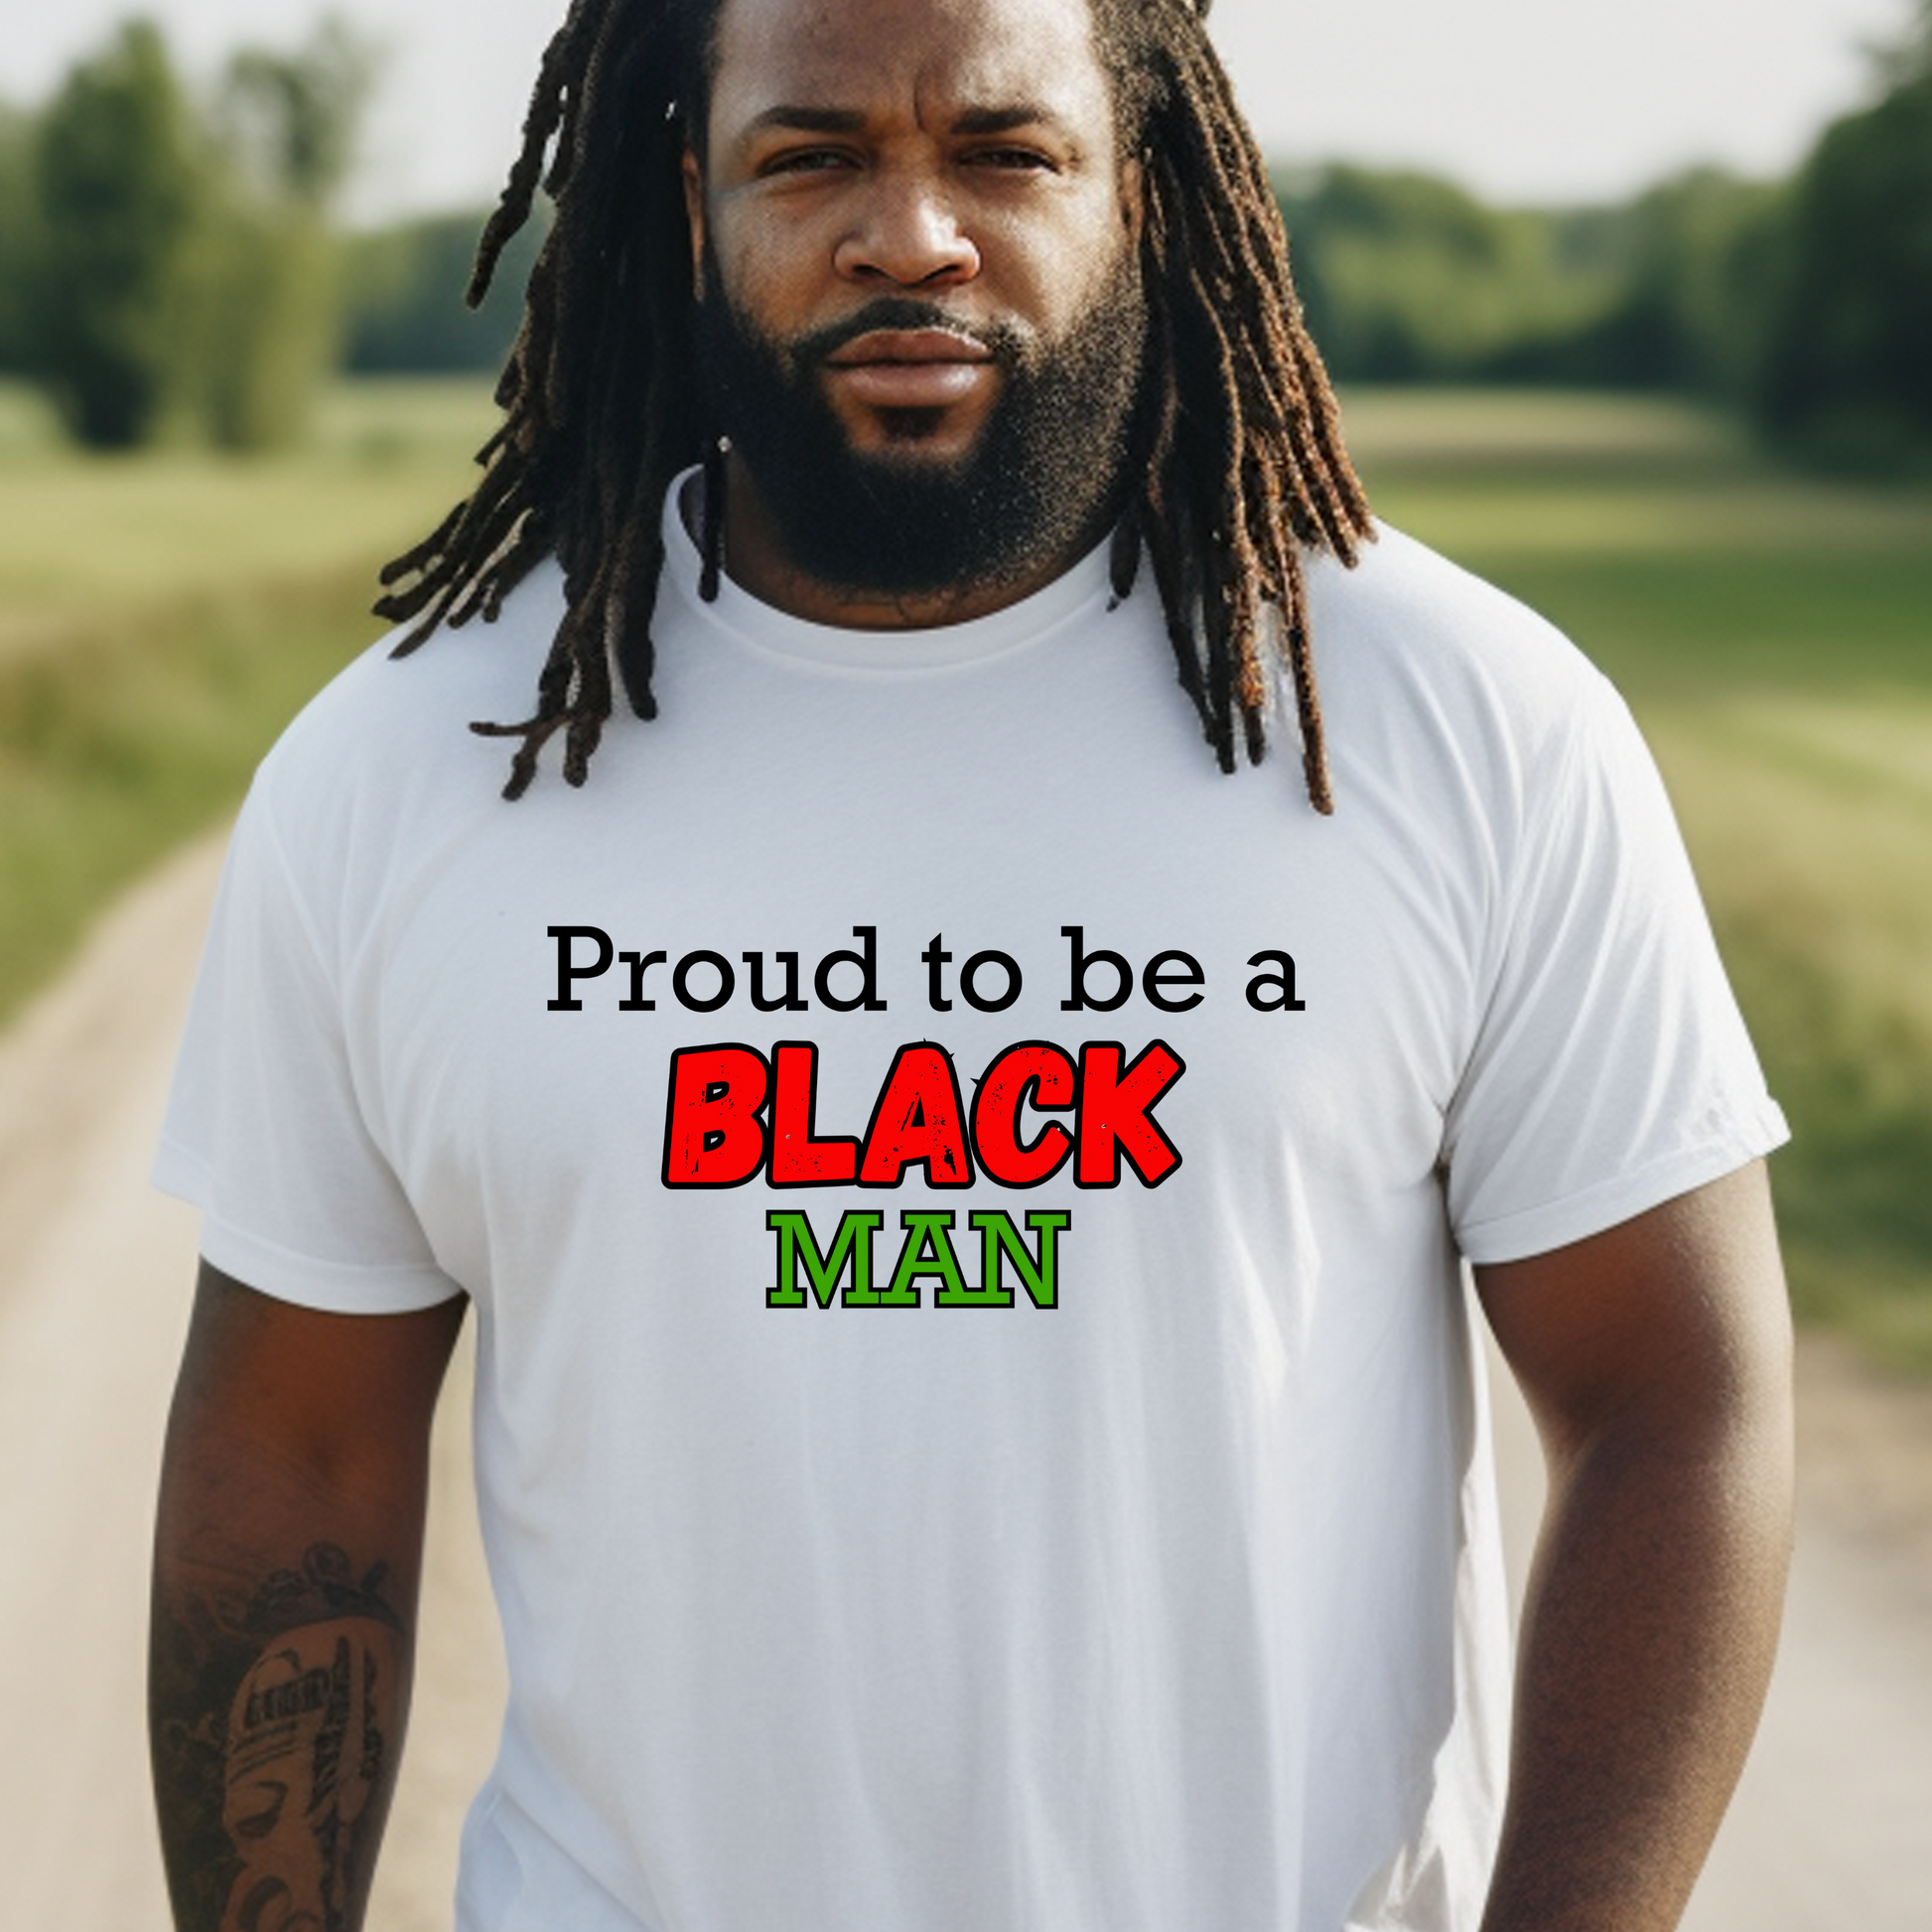 Celebrate your identity and faith with Triumph Tees' White Proud to be a Black Christian Man T-Shirt. Embrace the empowering design and proudly represent who you are in Christ. Shop now and make a statement of pride in your faith. 